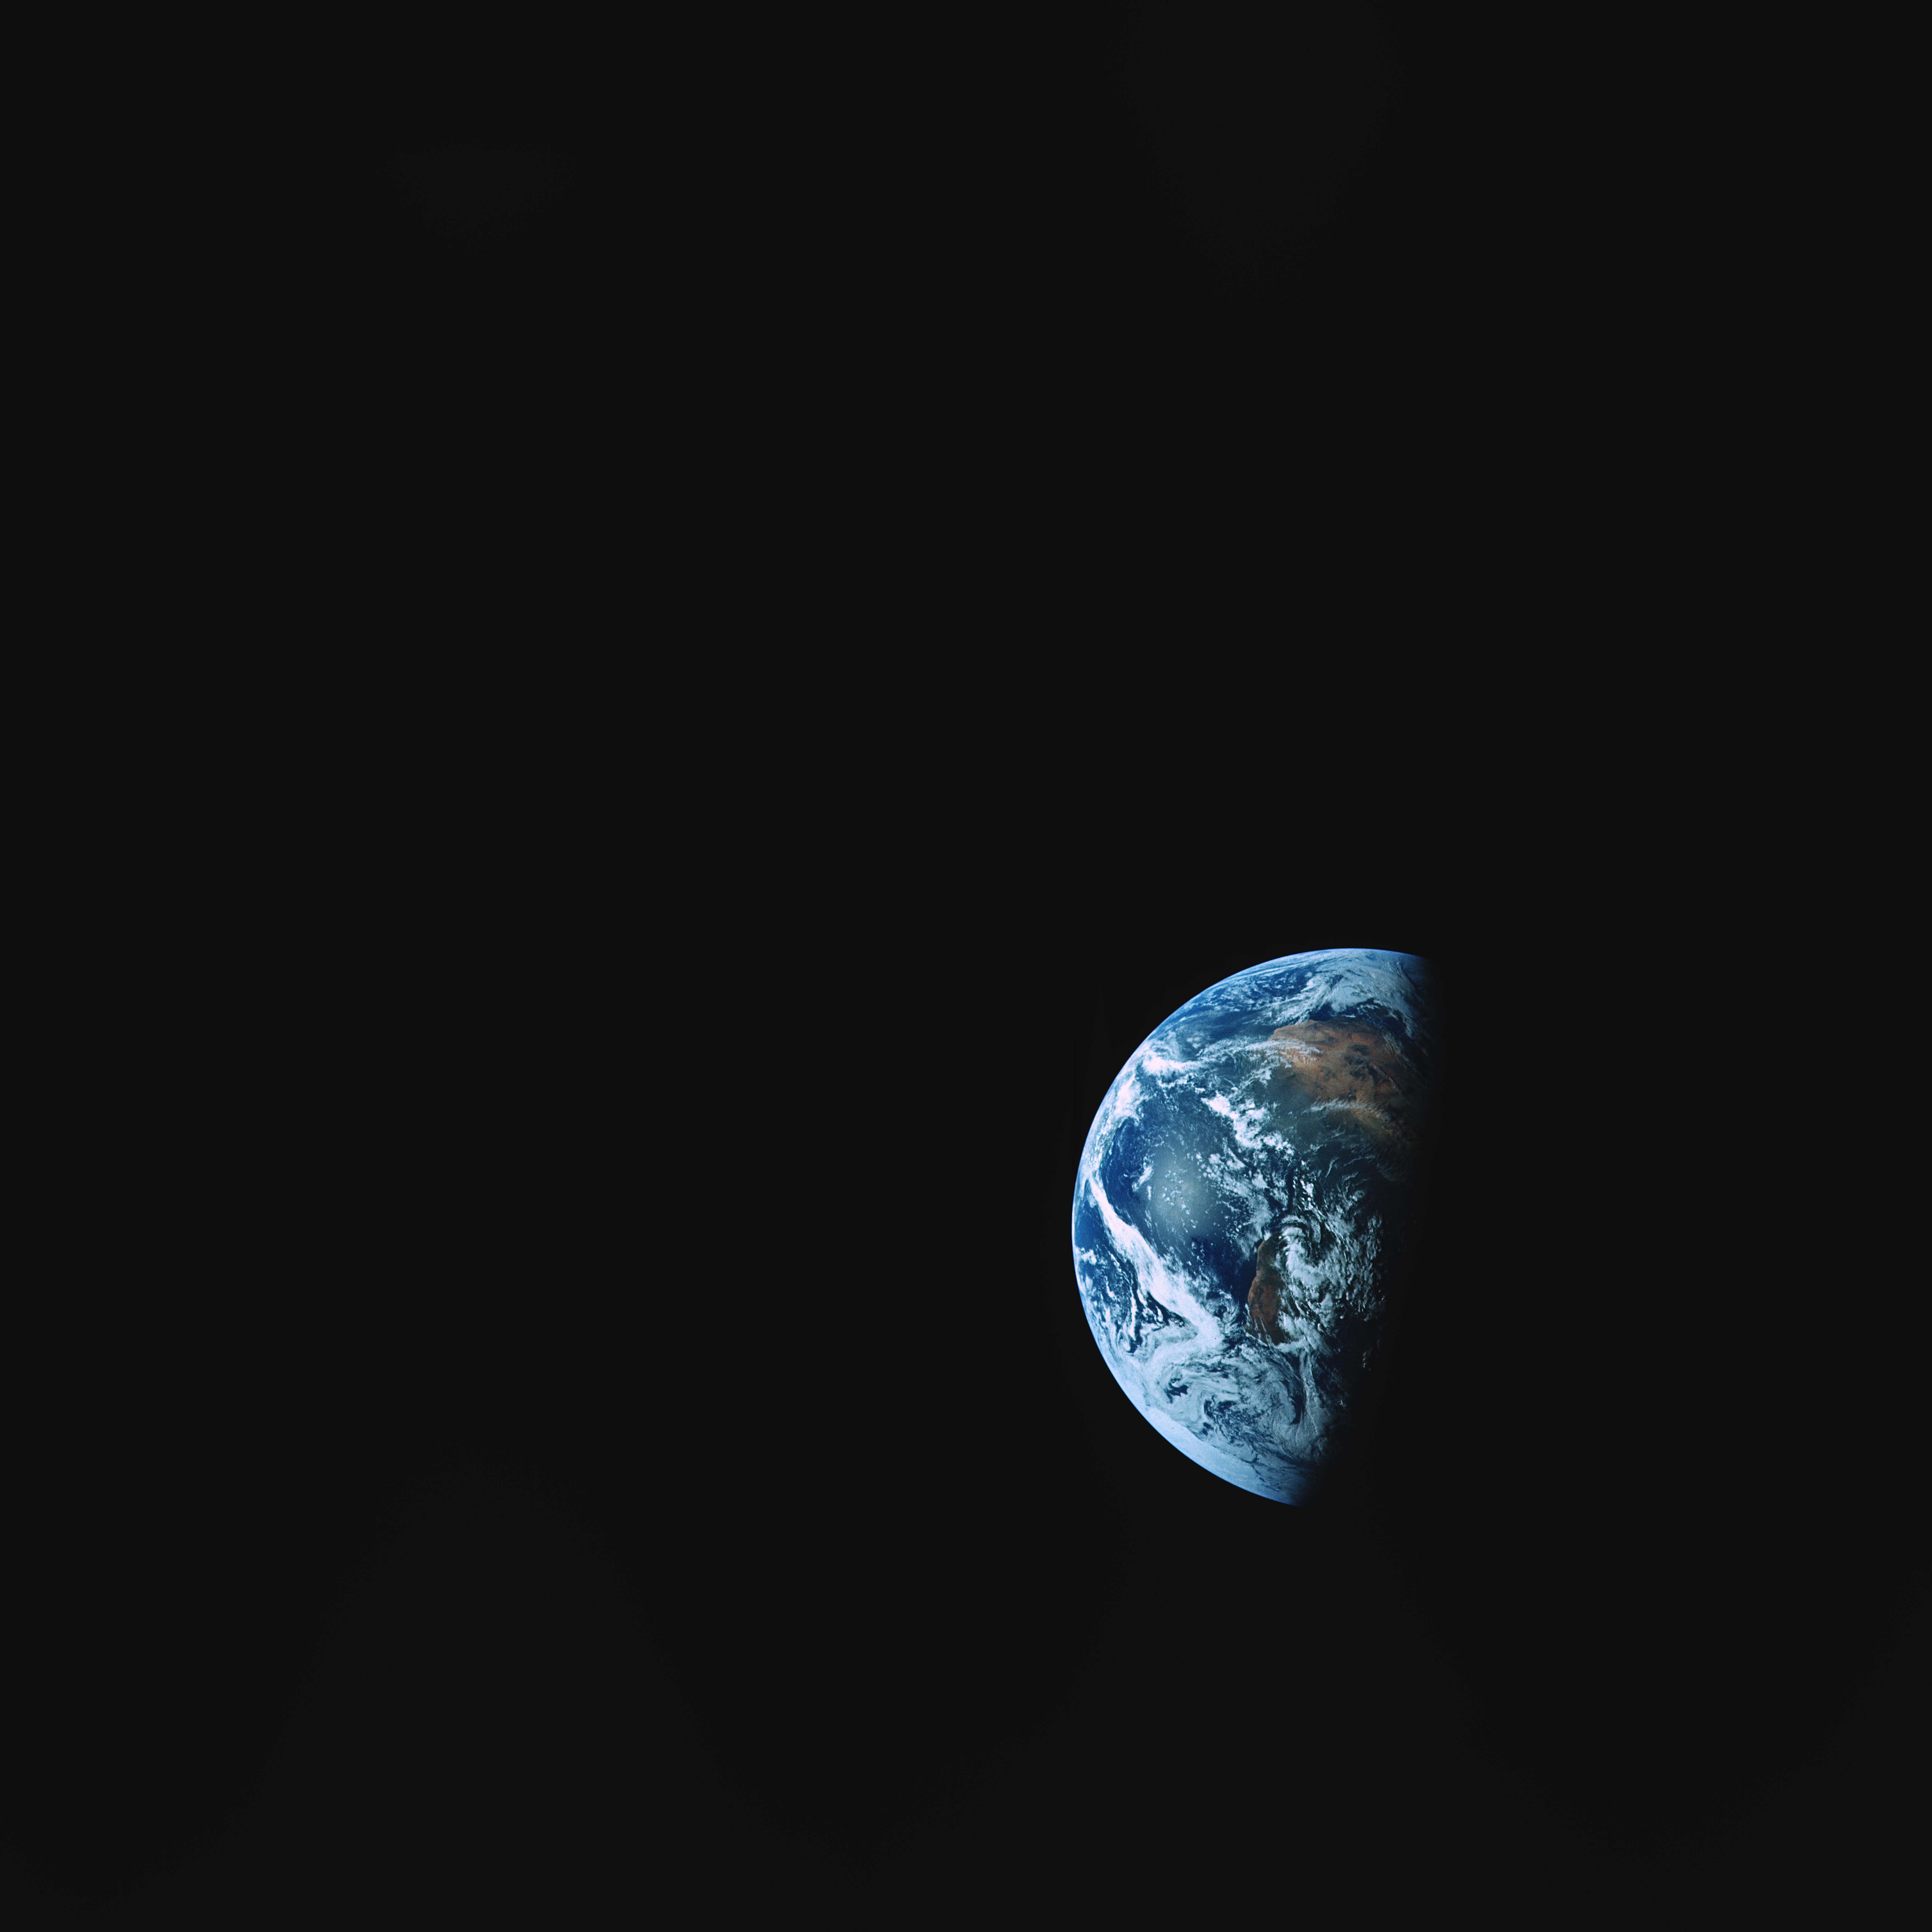 dark, earth, planet, universe, land, shadow images